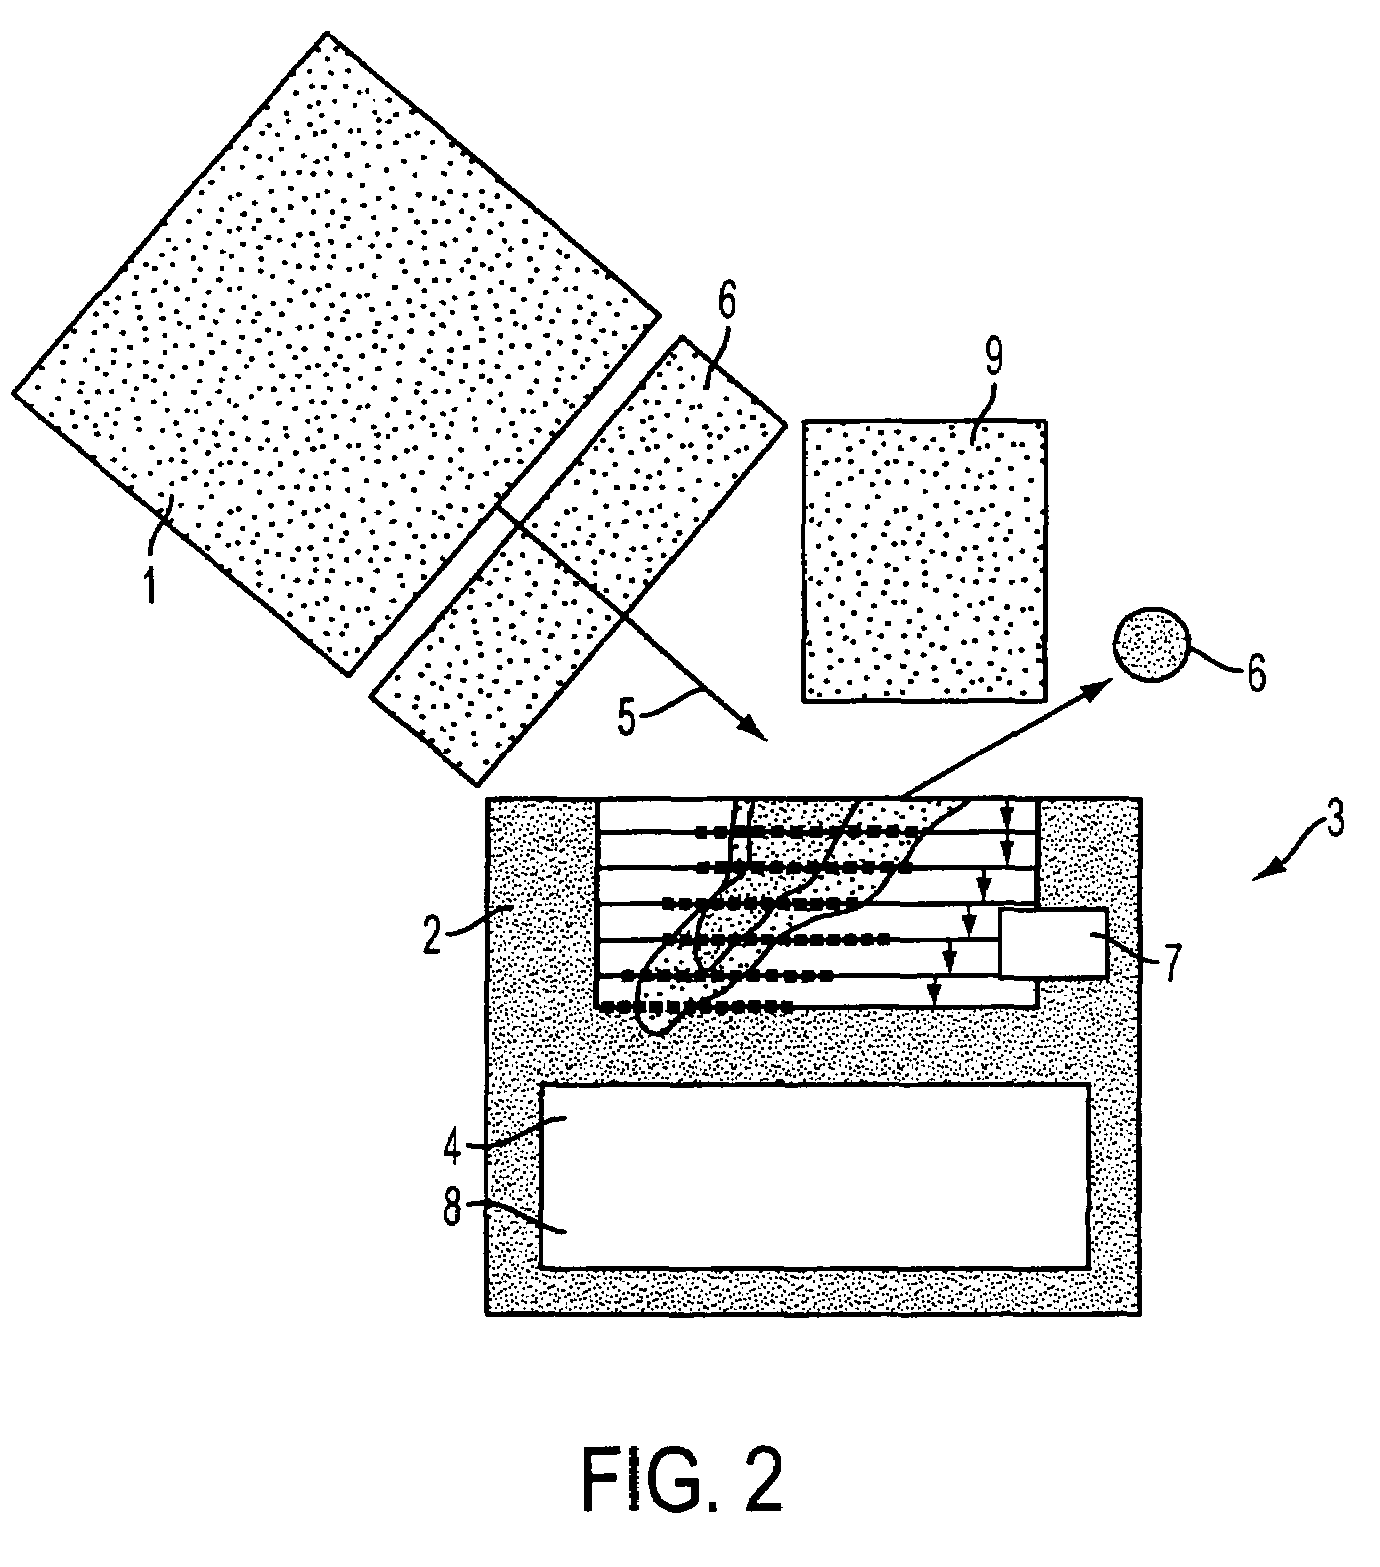 Method of an ultra-short femtosecond pulse and KW class high average-power laser for preventing cold-worked stress corrosion cracking in iron steels and alloyed steels including stainless steels